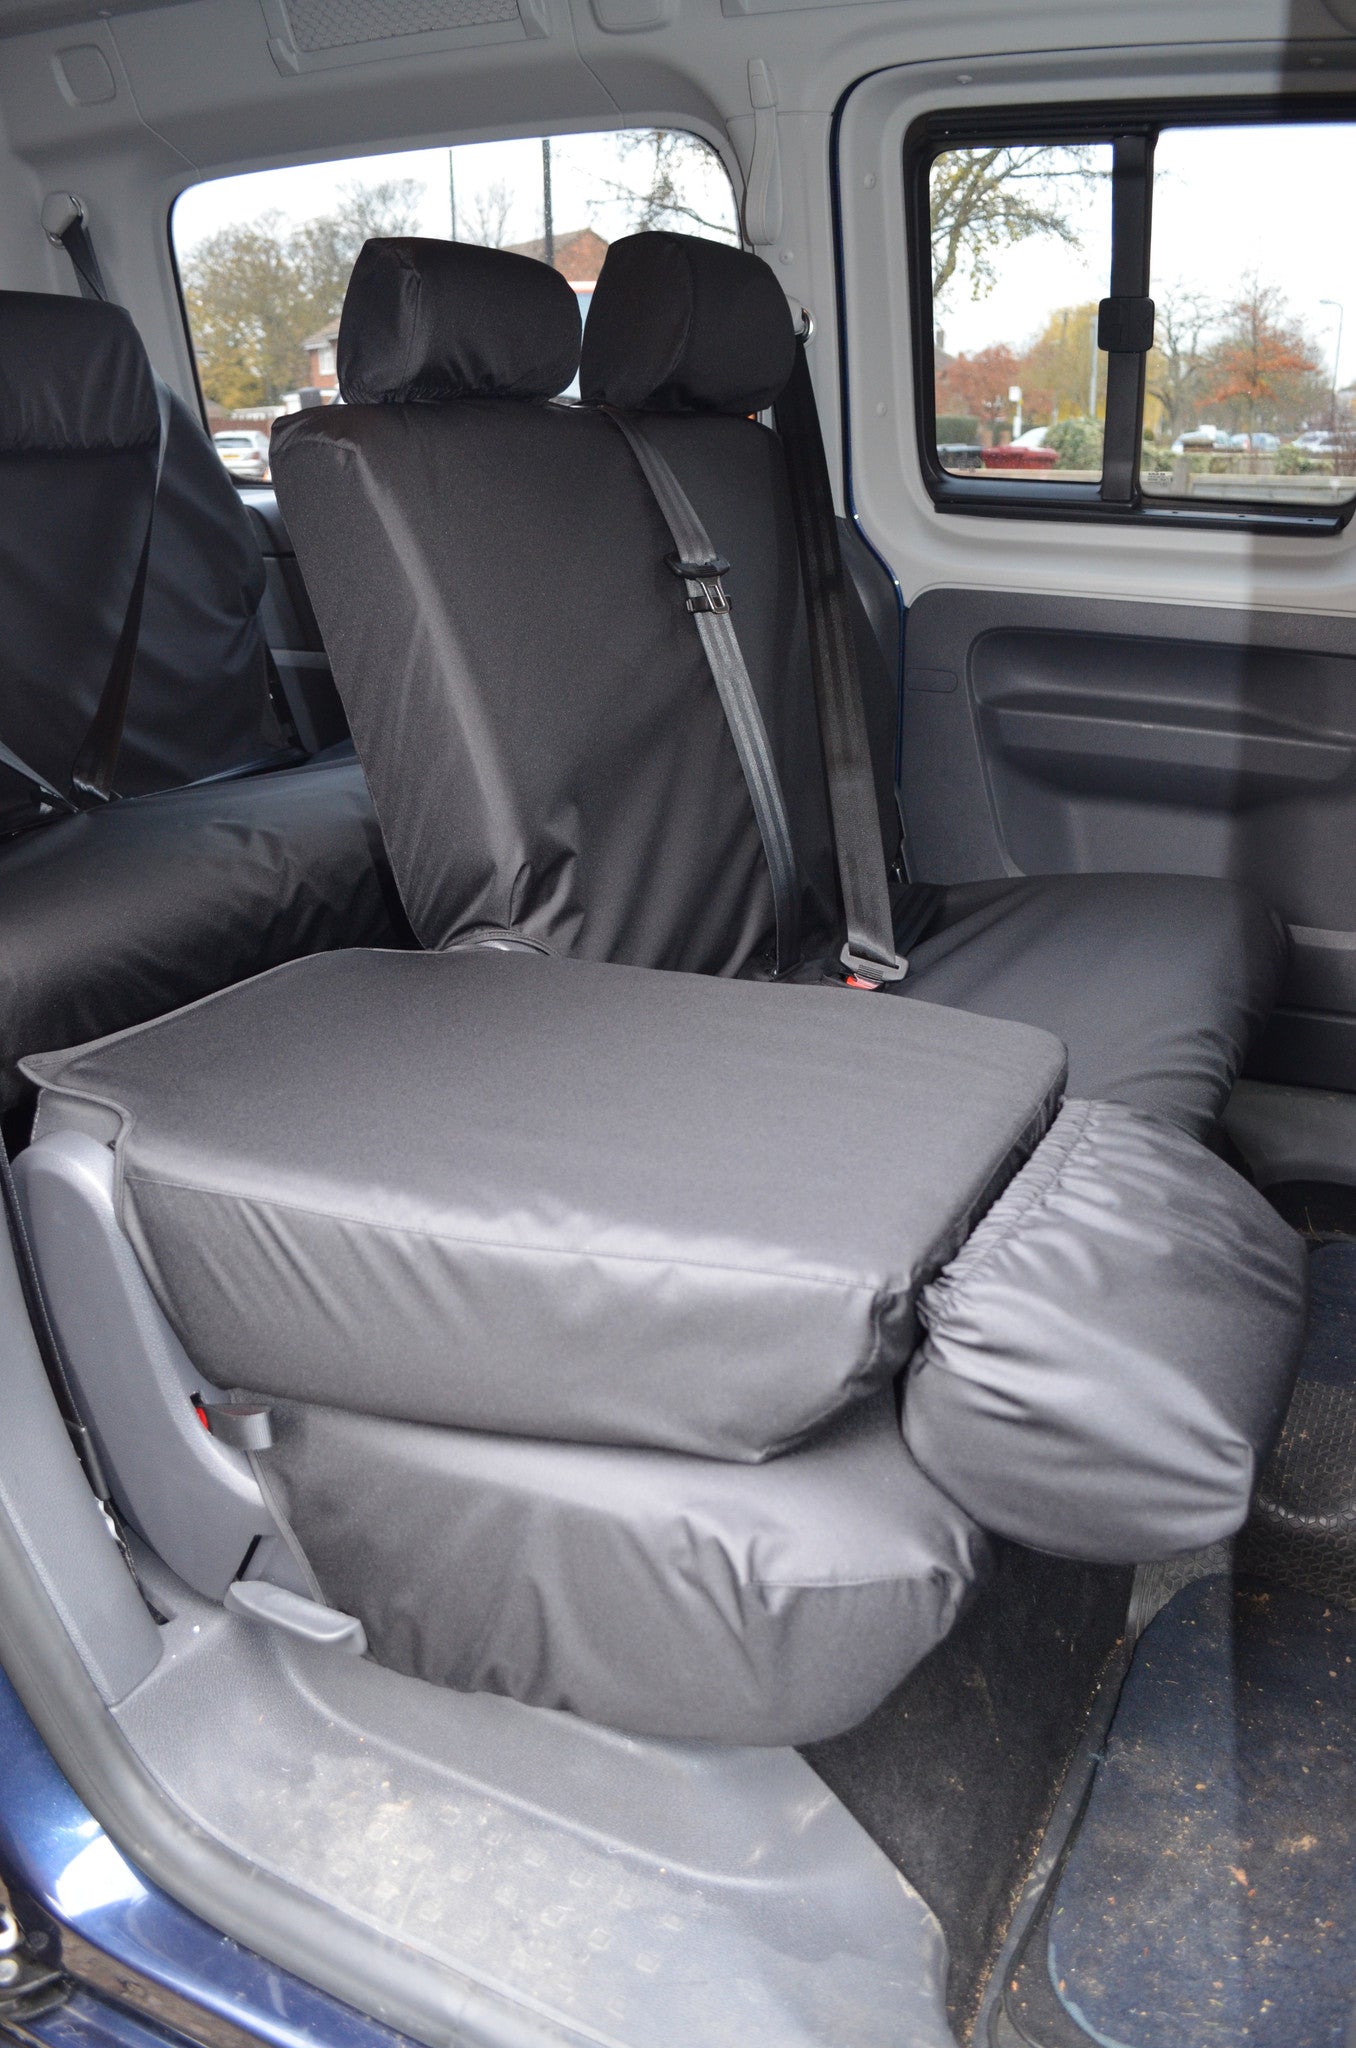 Volkswagen Caddy 2004 Onwards Seat Covers  Turtle Covers Ltd